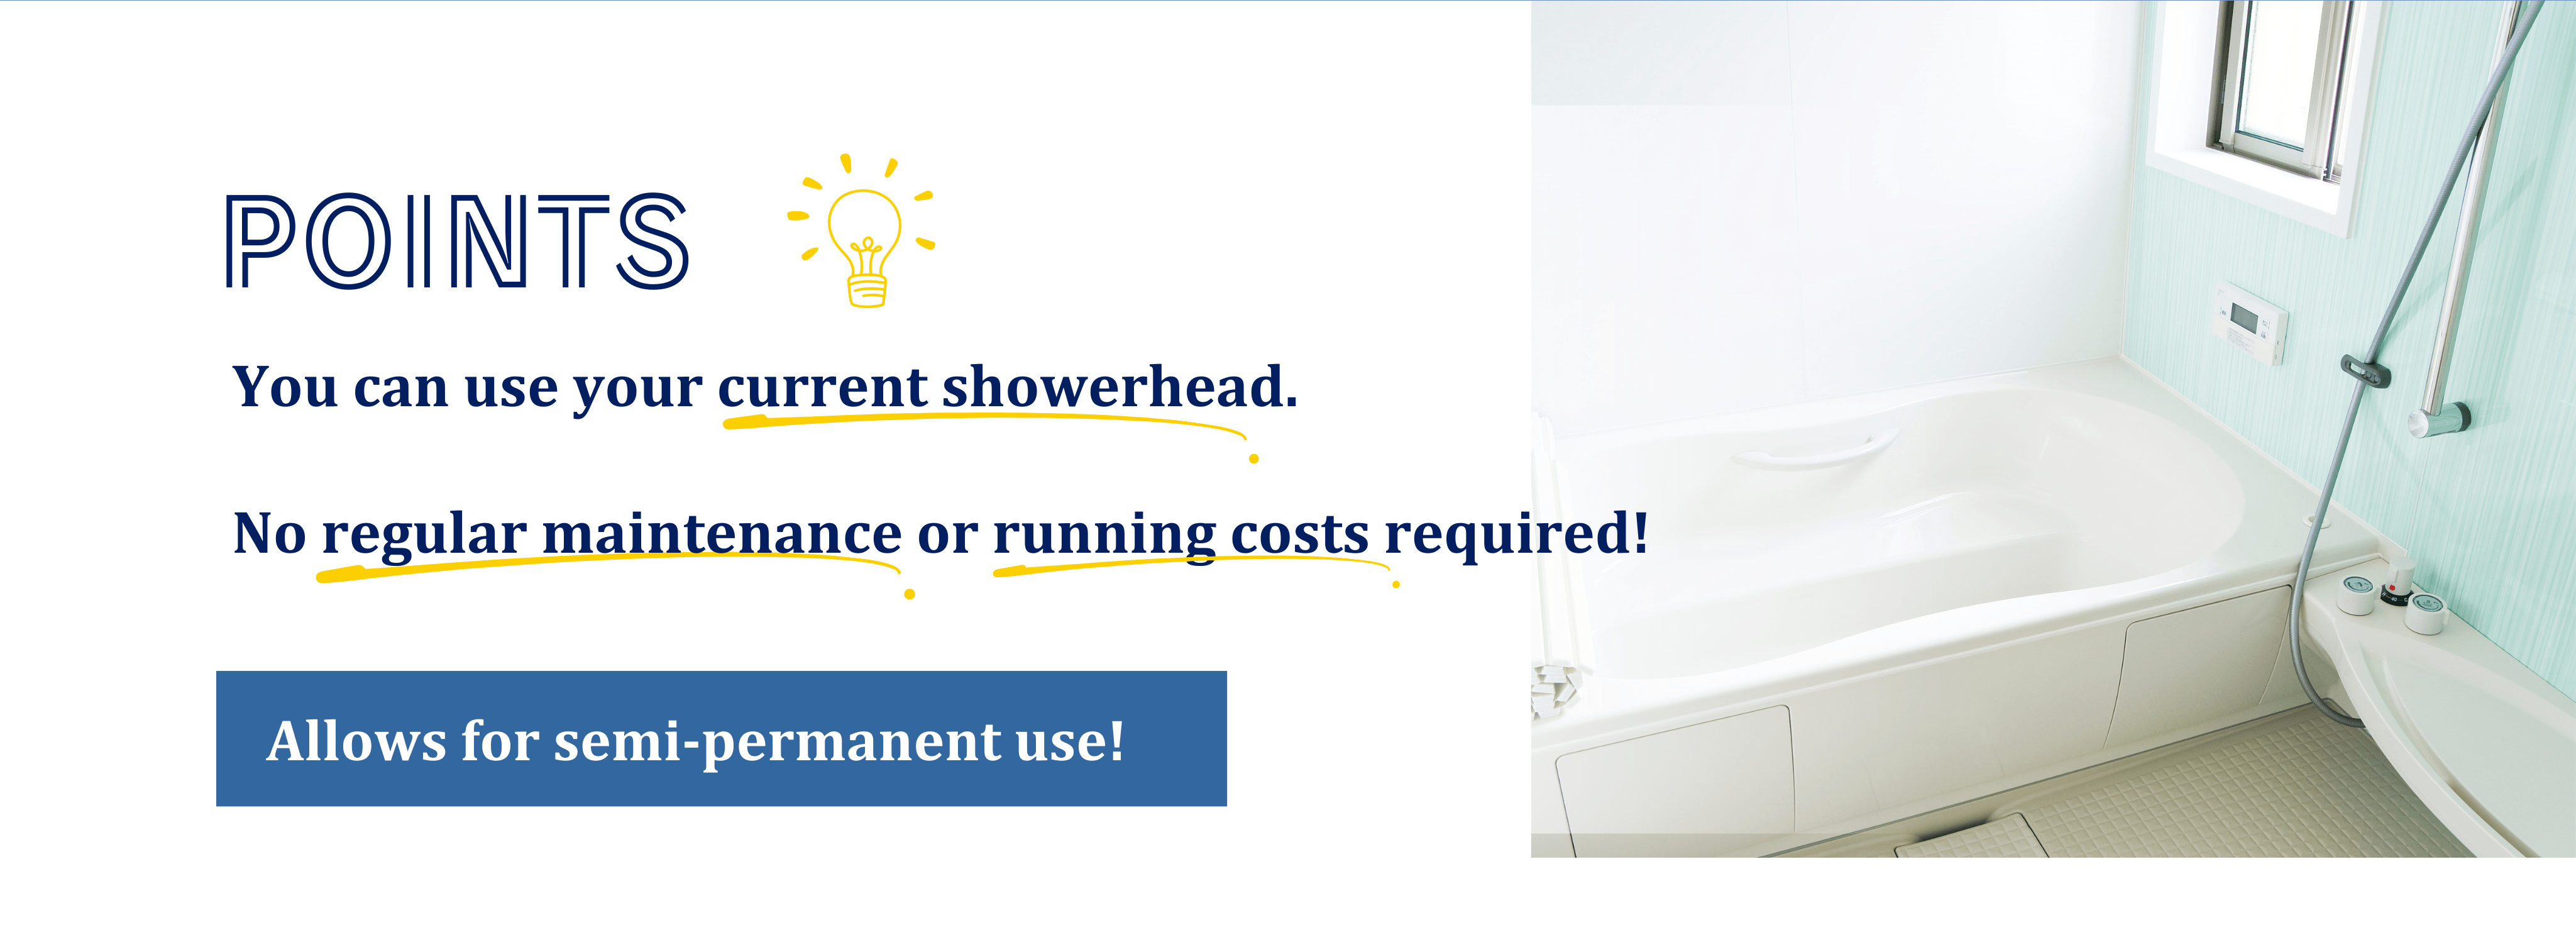 You can use your current showerhead.No regular maintenance or running costs required.